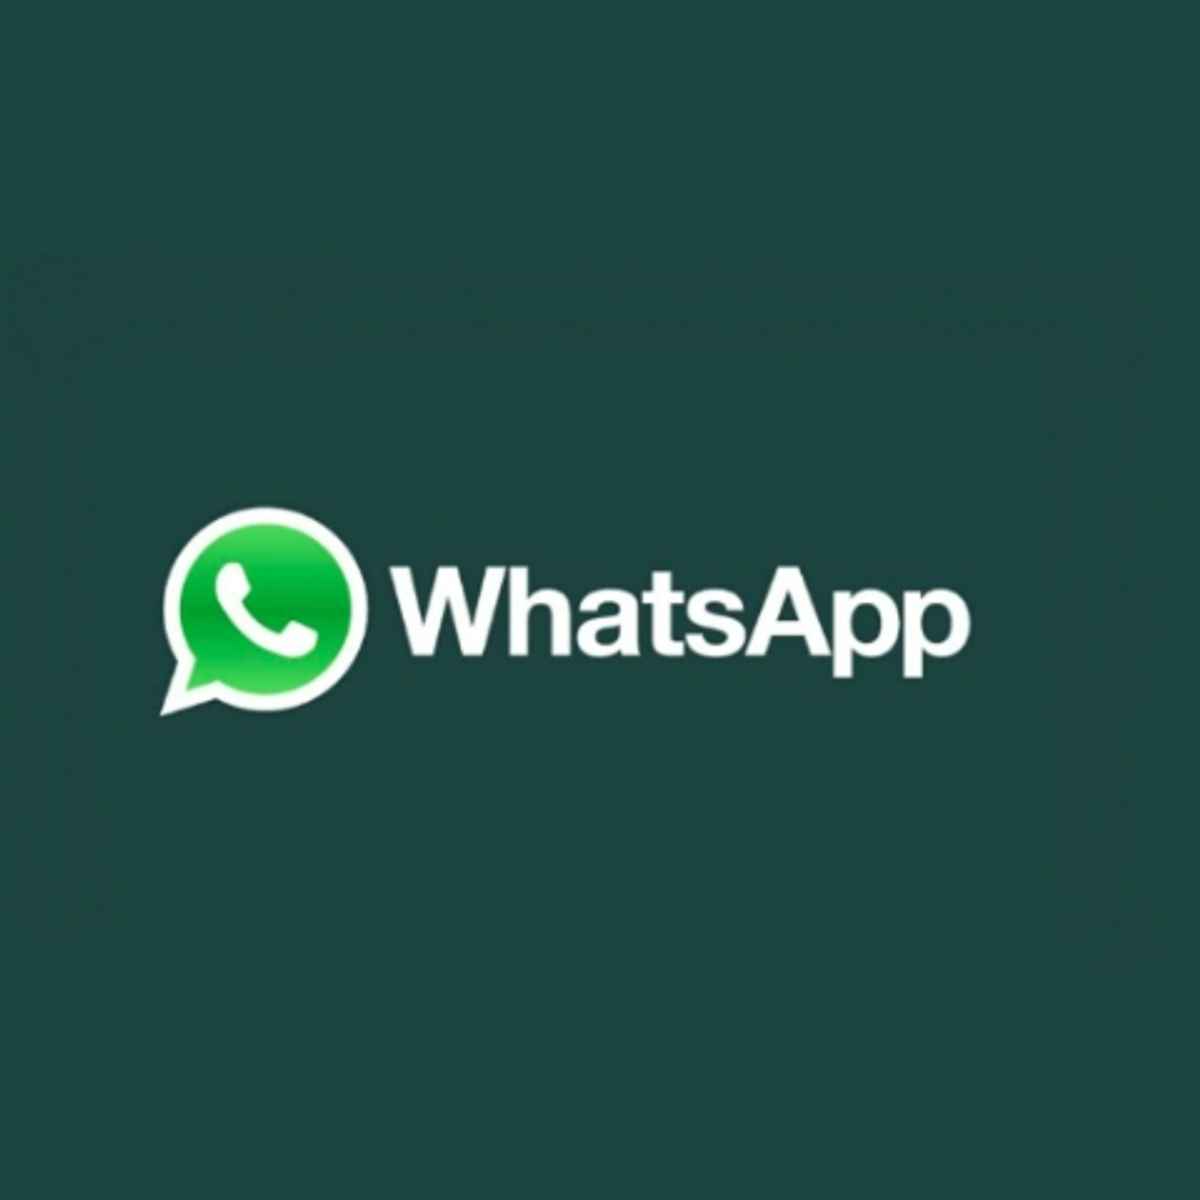 WhatsApp spyware: Israeli firm NSO linked to hack faces ... - 